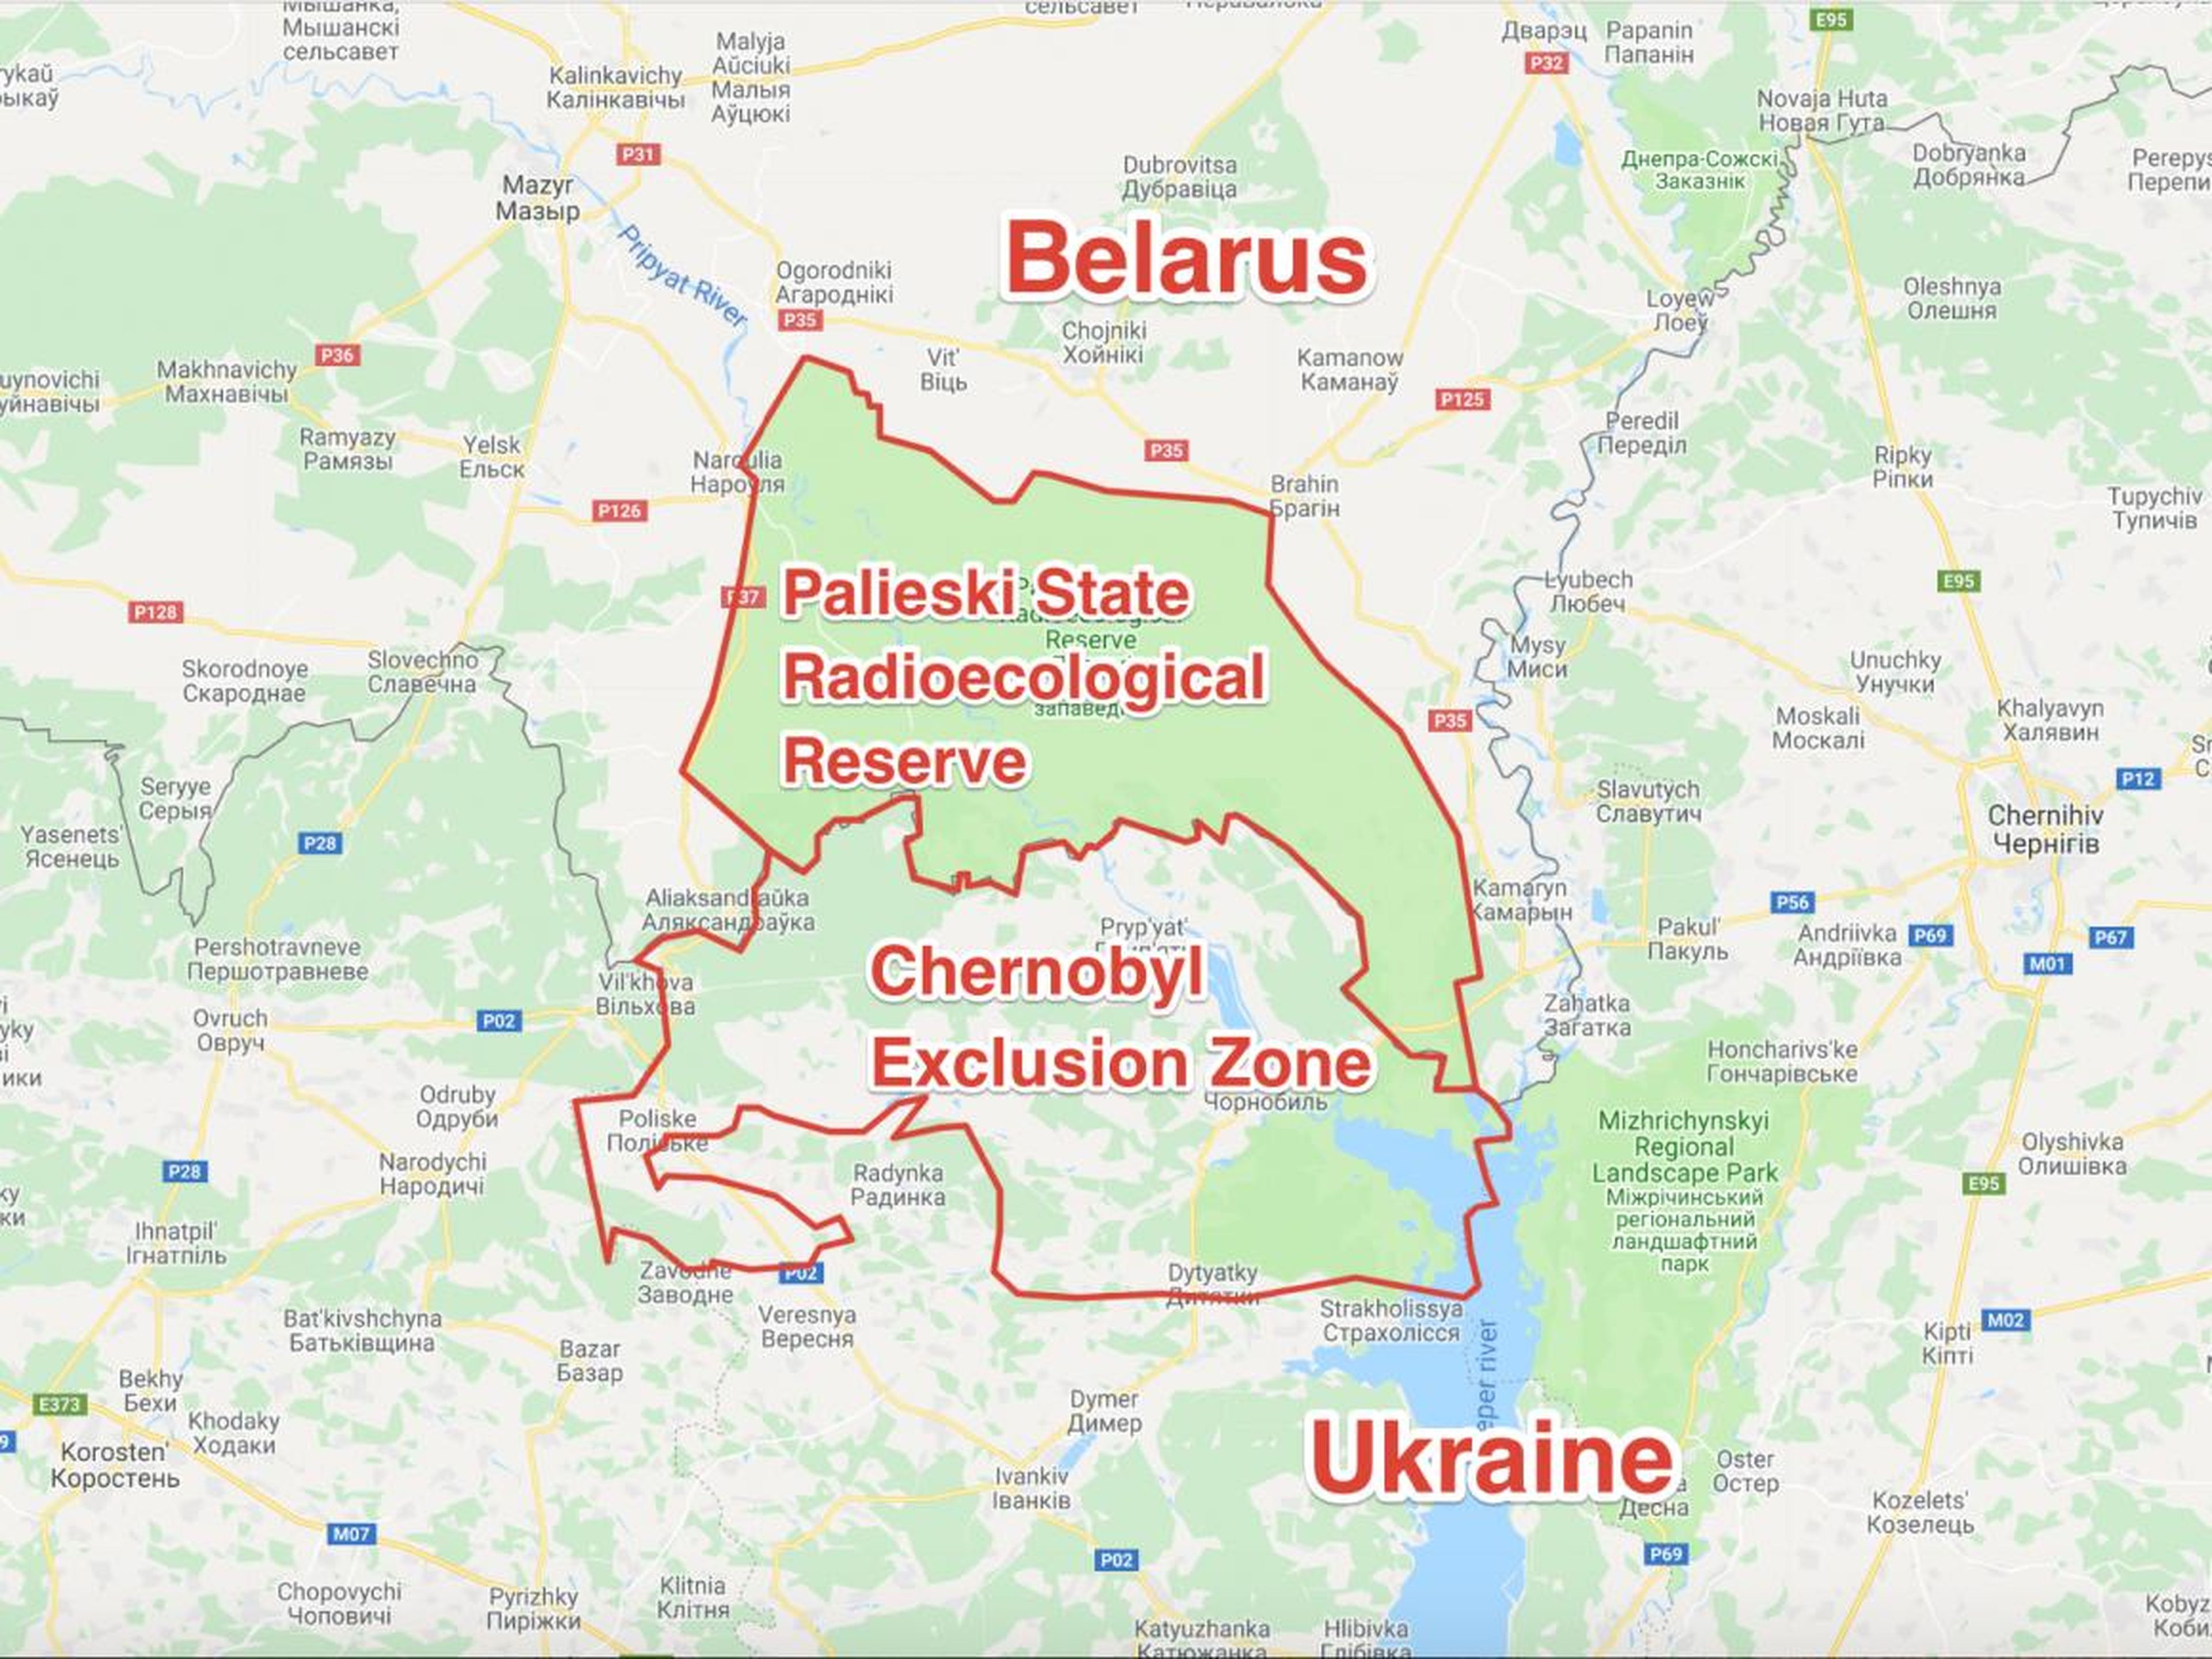 It adjoins the exclusion zone in neighboring Belarus, known as the Palieski State Radioecological Reserve. Though the explosion took place in Ukraine, much of the radiation from the Chernobyl disaster was blown north to Belarus.